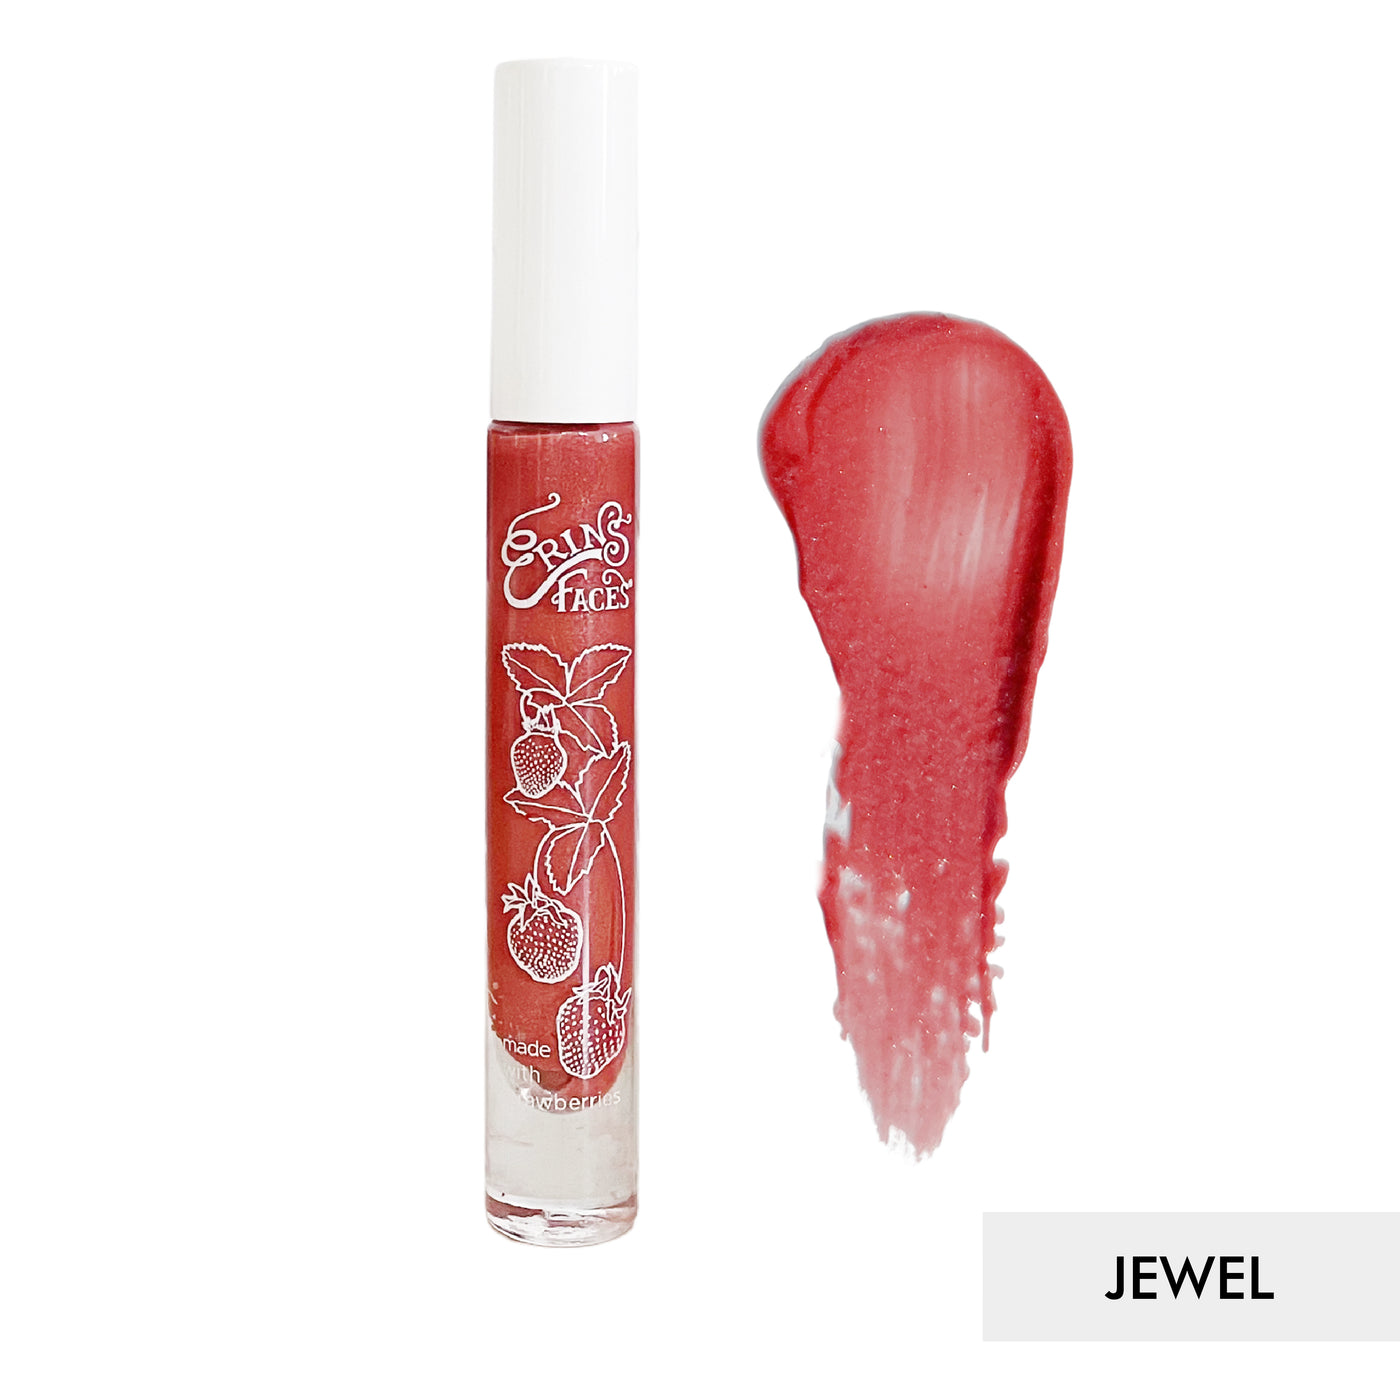 erin's faces fruit smoothie lip gloss bottle and swatch against white background of the shade jewel